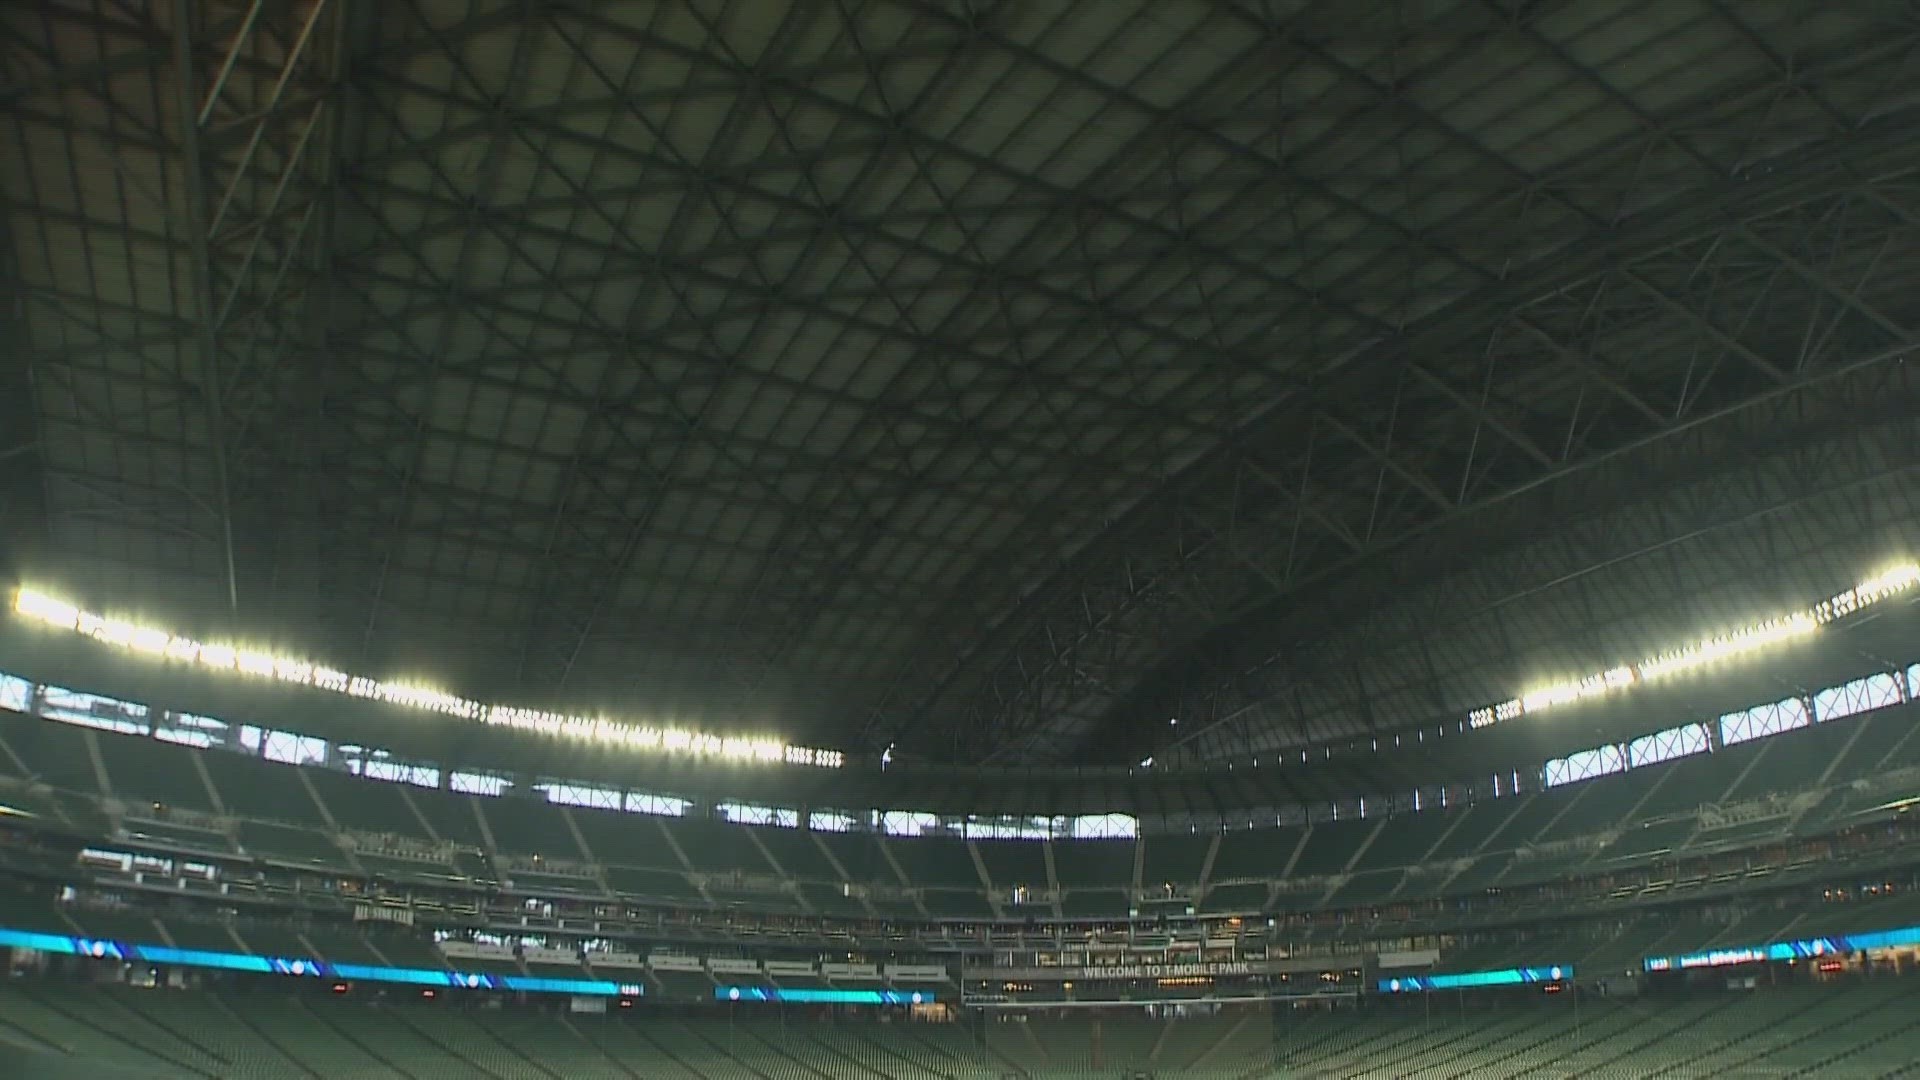 The roof was finished in 1999 and the first game played was July 15, 1999.